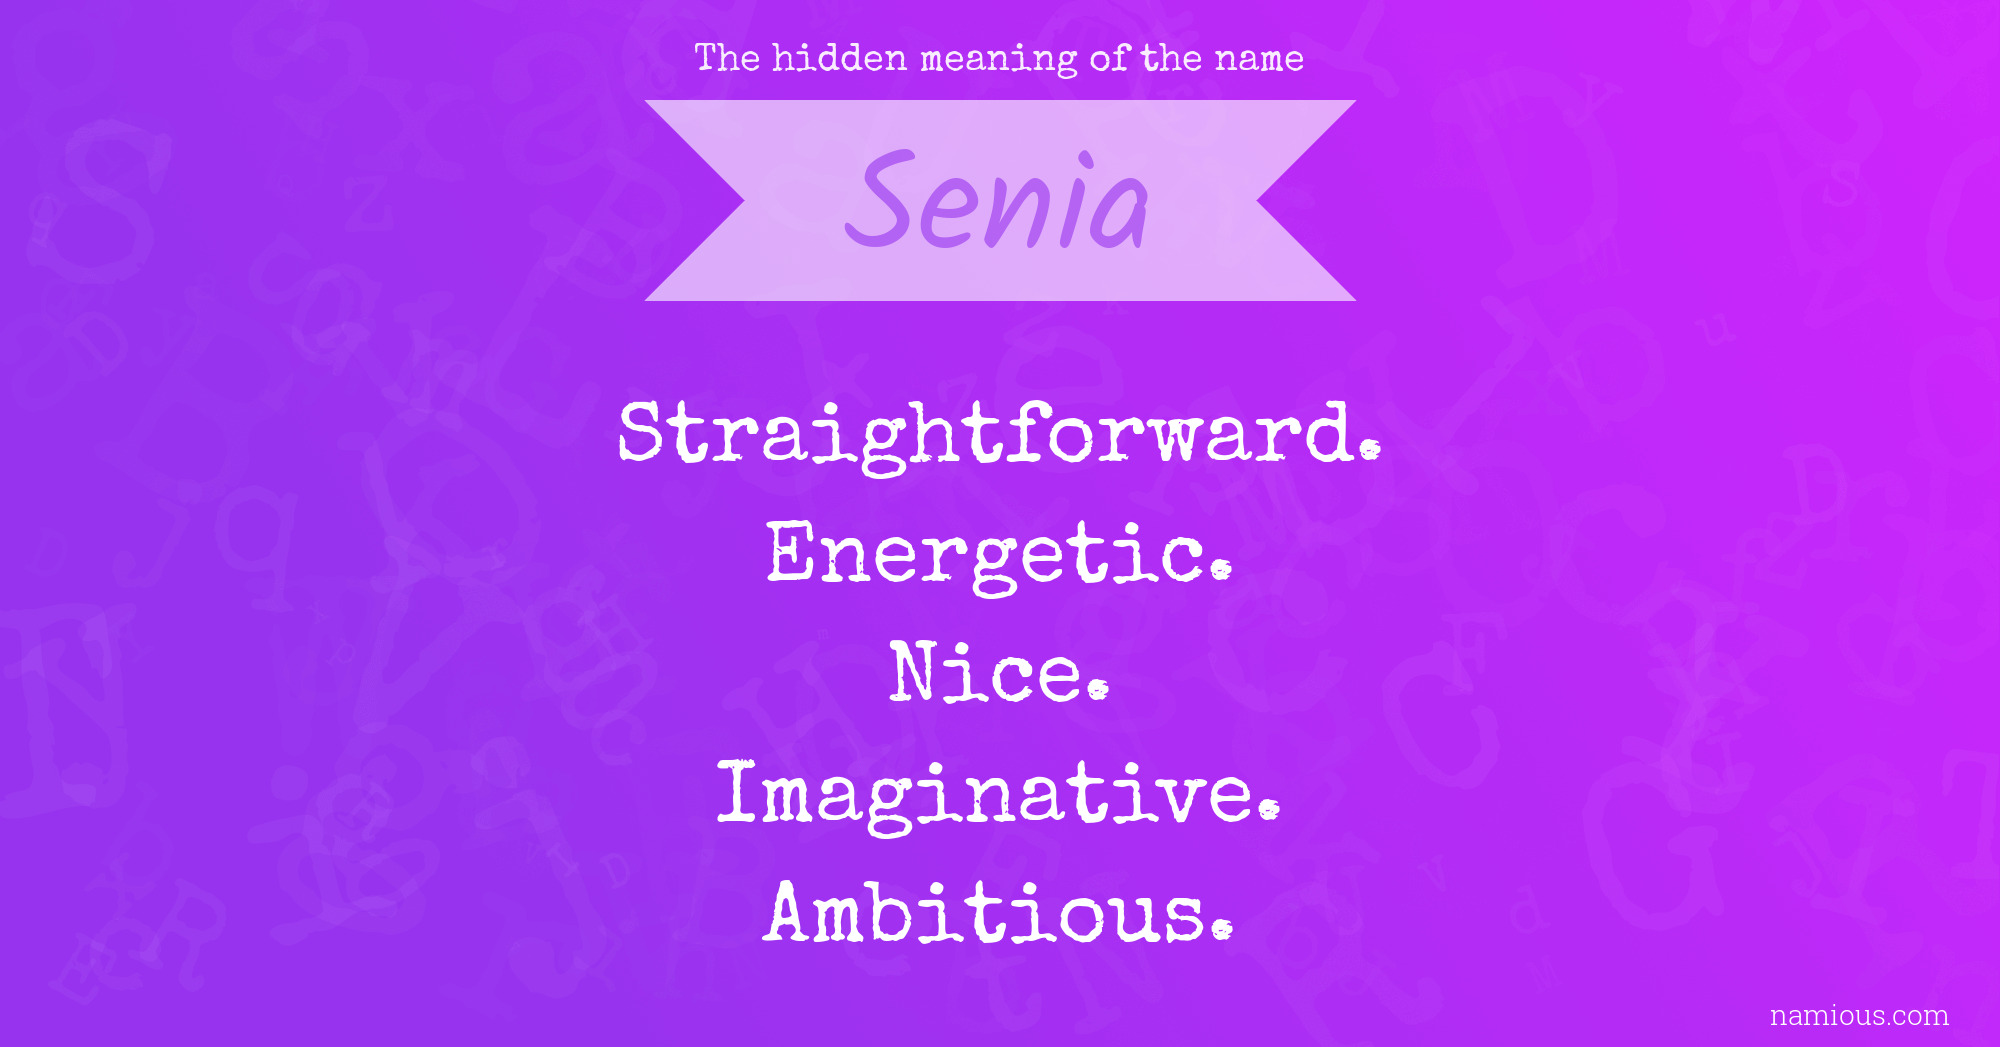 The hidden meaning of the name Senia